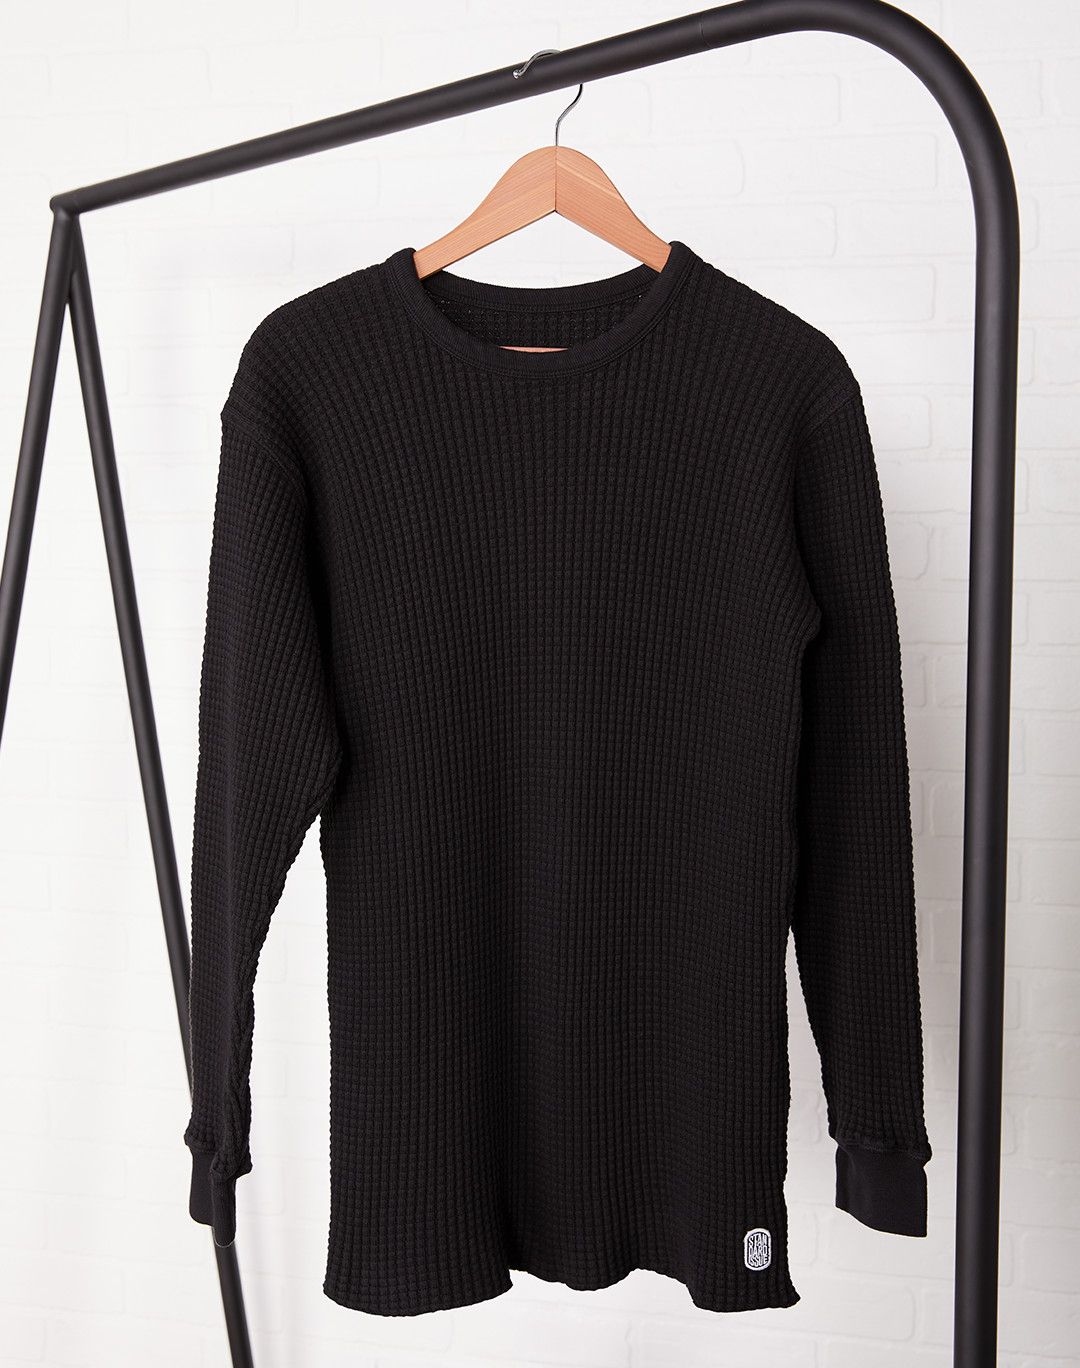 Clothing, Clothes hanger, Black, Sleeve, Long-sleeved t-shirt, Outerwear, T-shirt, Jersey, Shoulder, Top, 